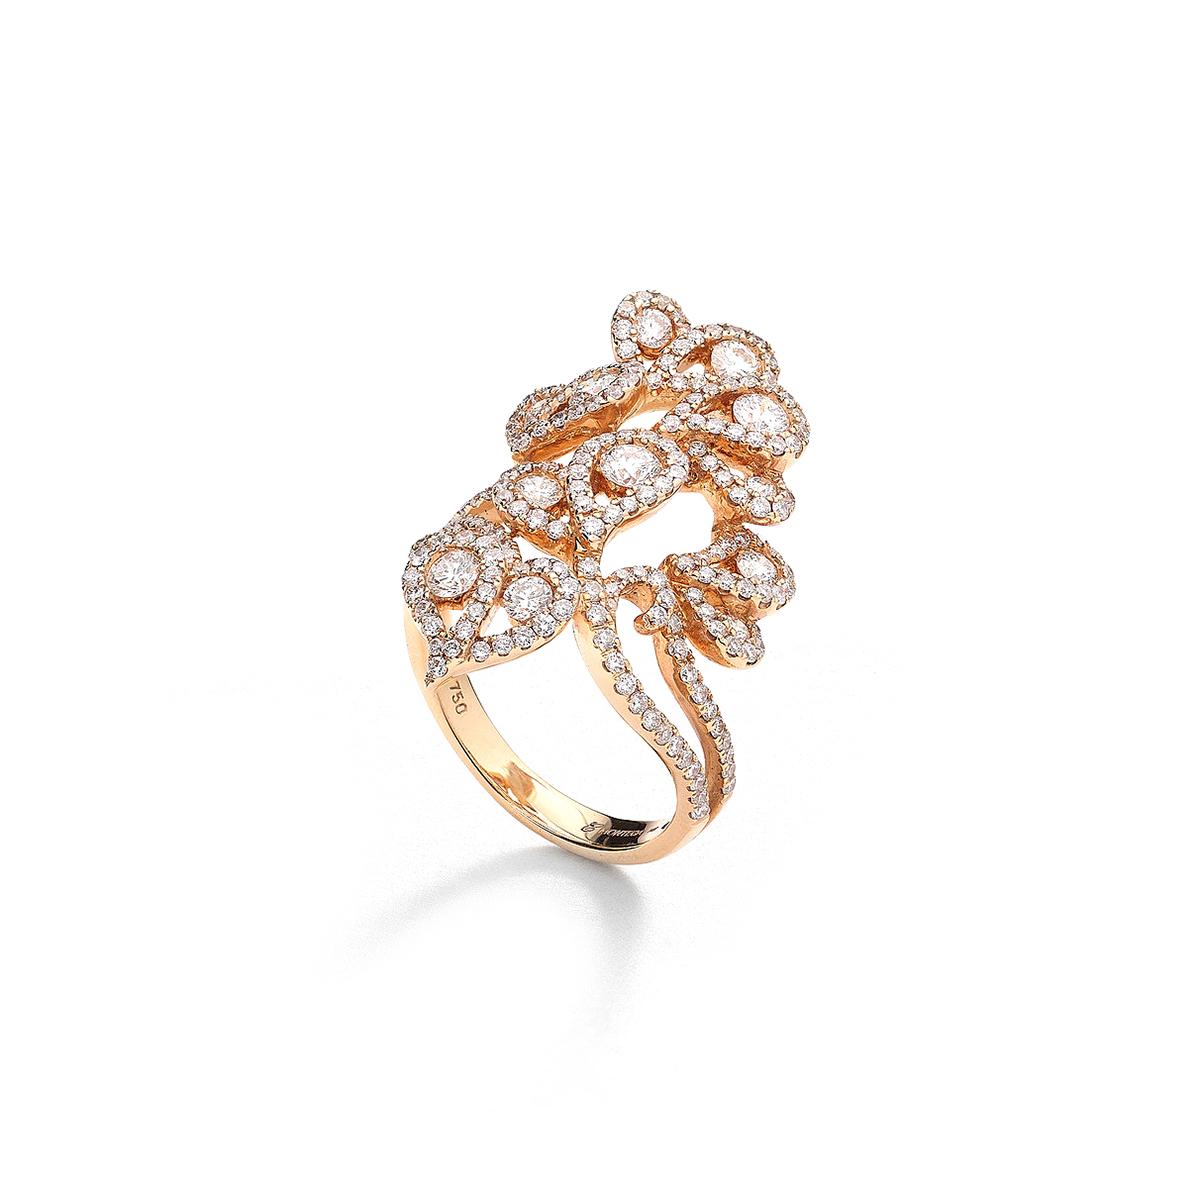 Ring in 18kt pink gold set with 5 diamonds 0.52 cts and 212 diamonds 1.48 cts Size 53